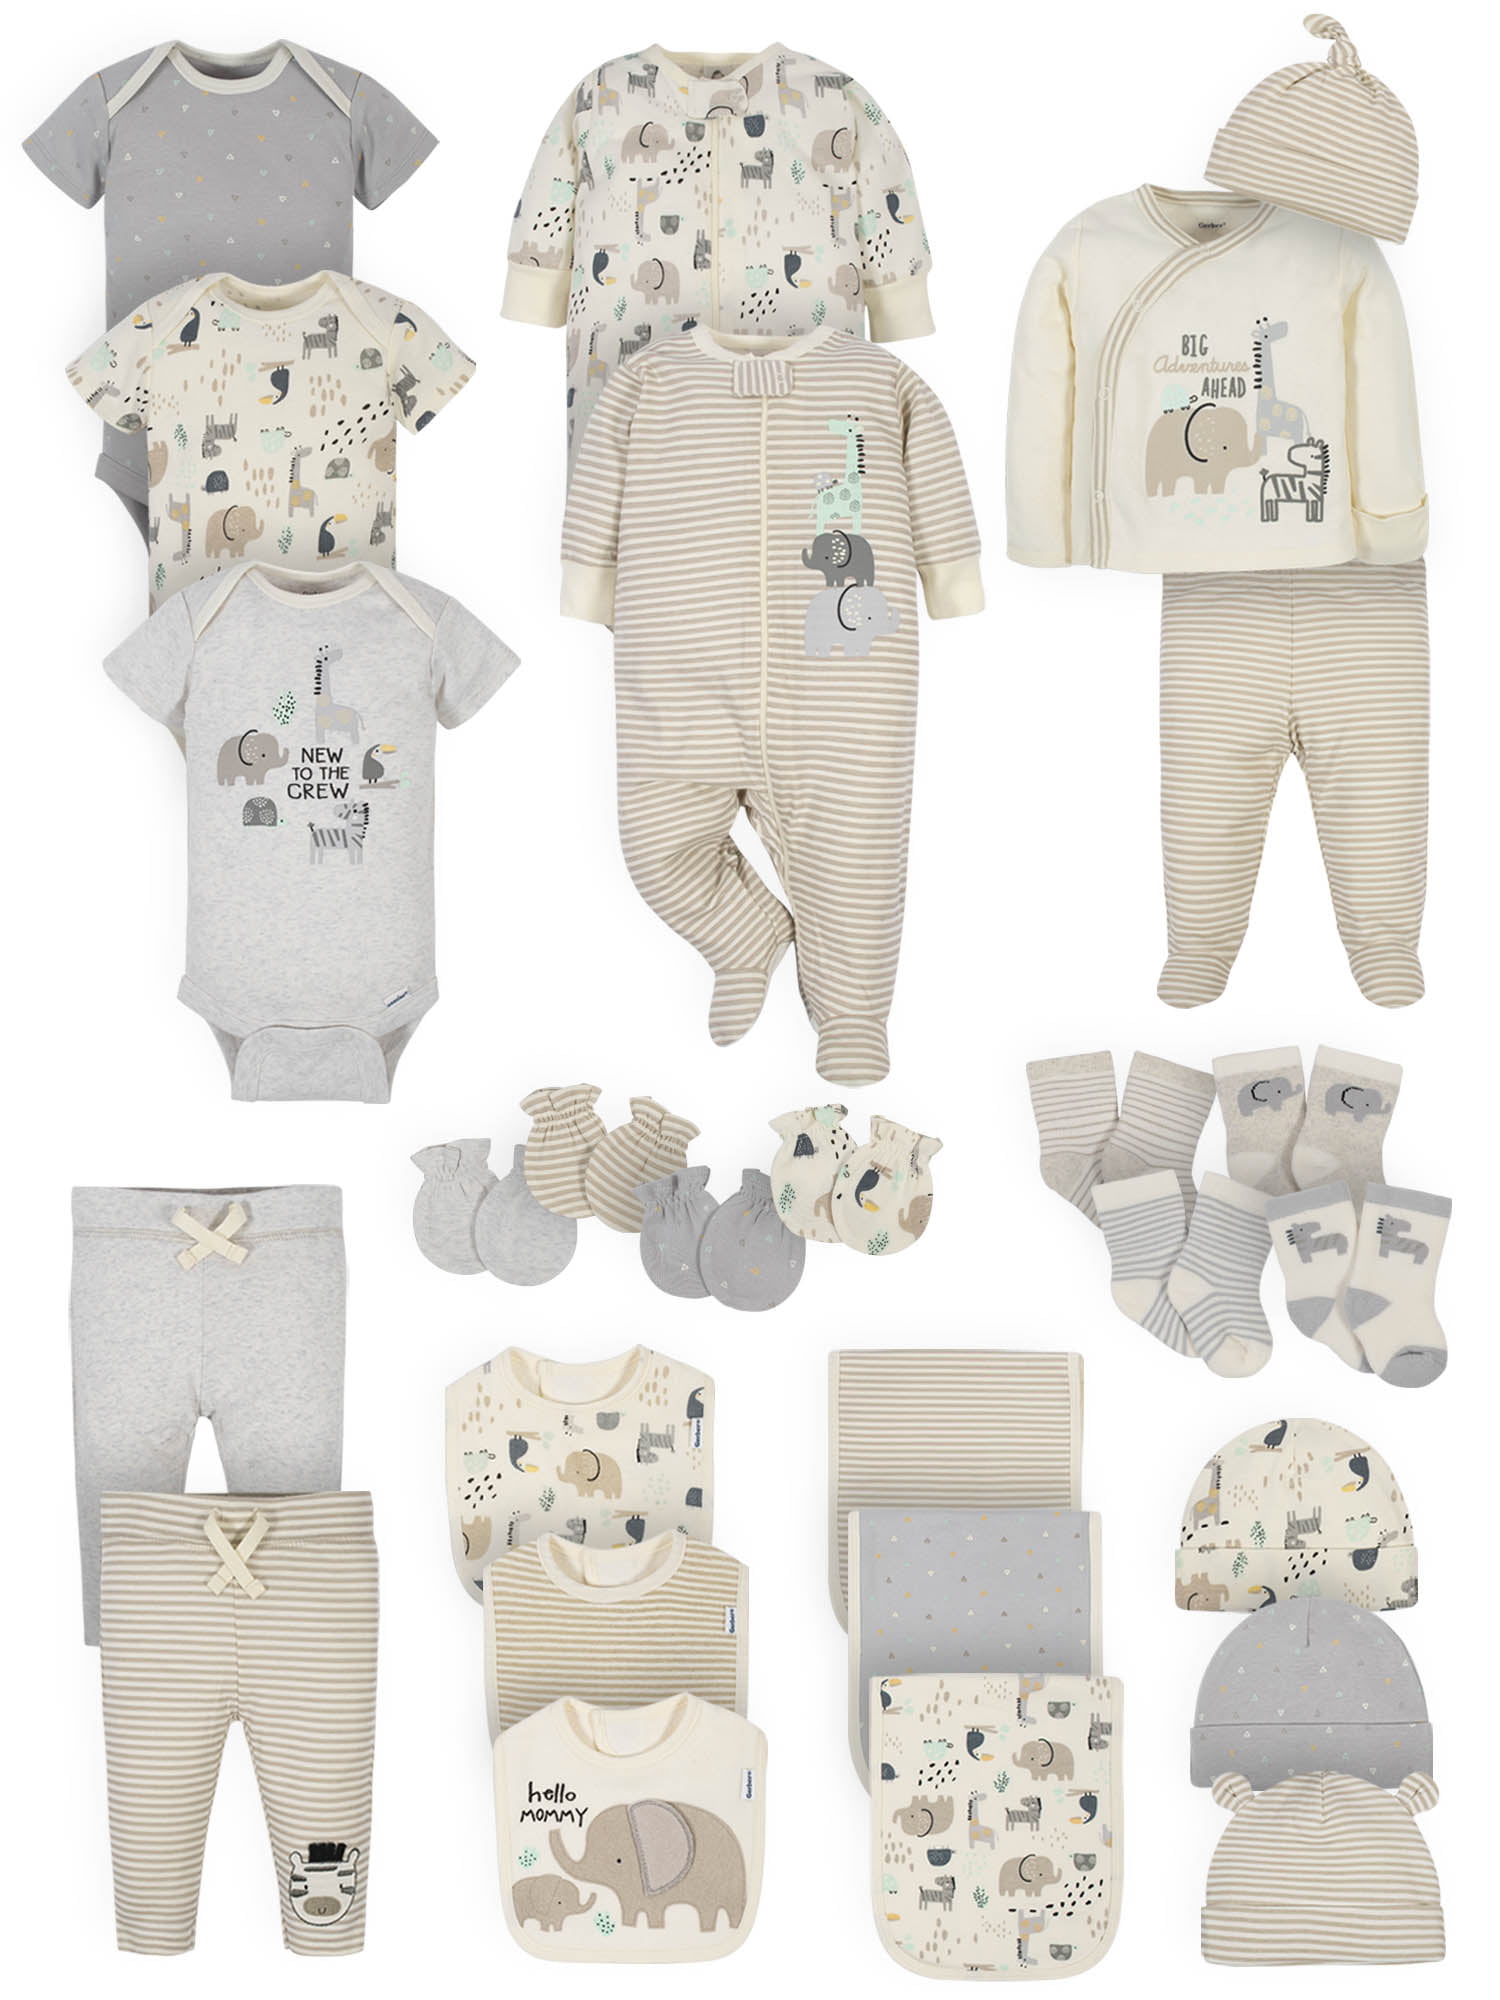 Neutral baby items